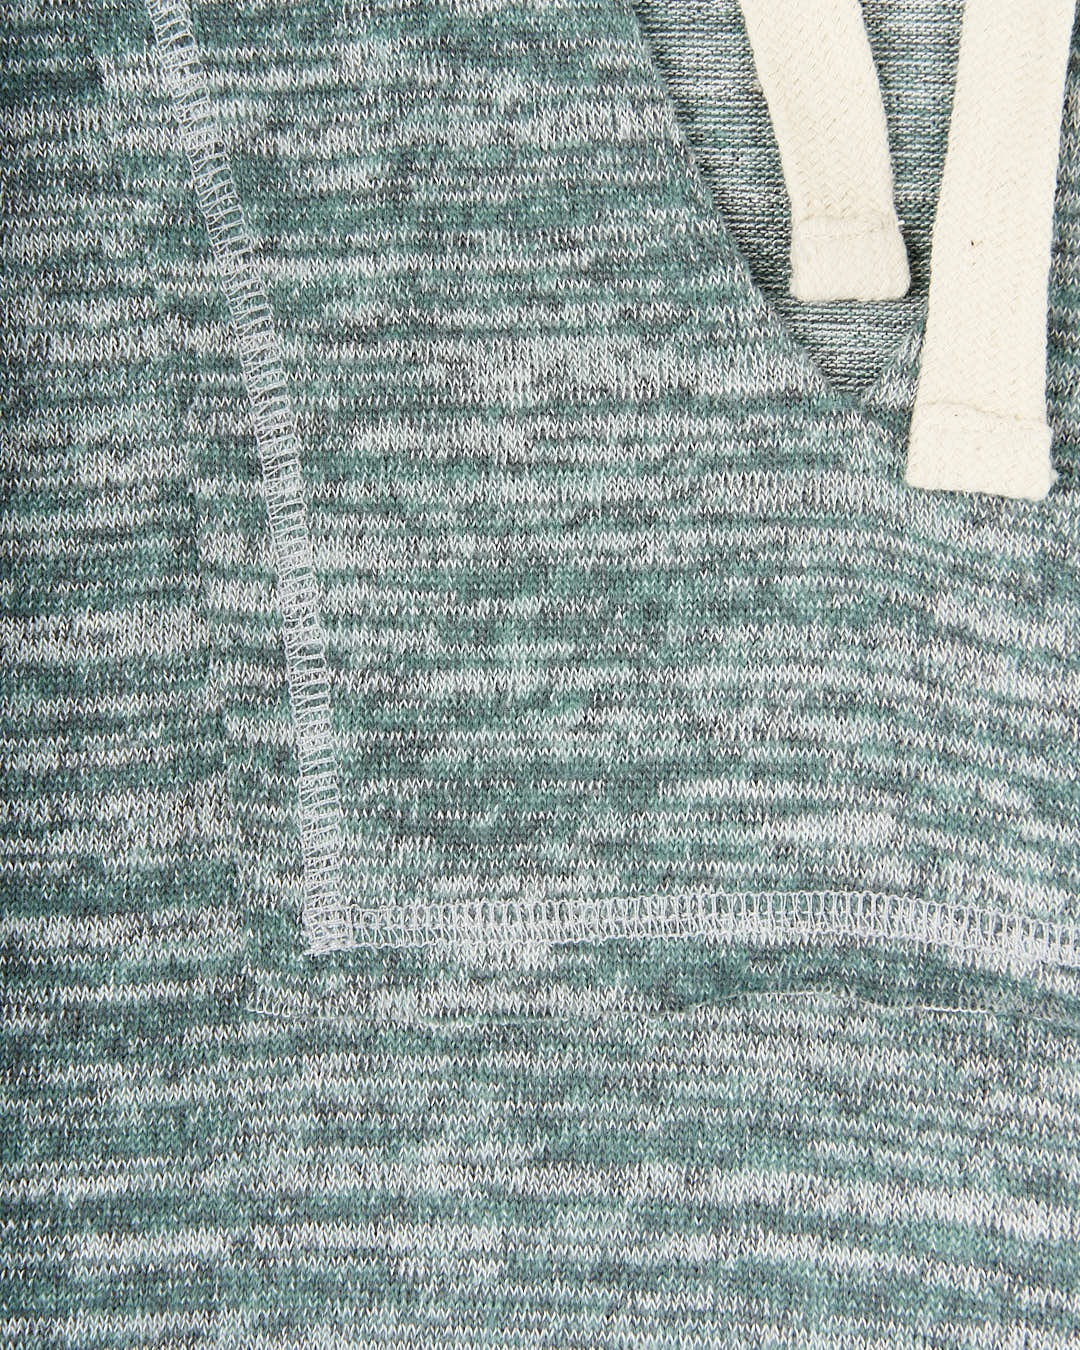 A close up of a Daydreamer - Womens Pop Hoodie in Green with white trim by Saltrock.